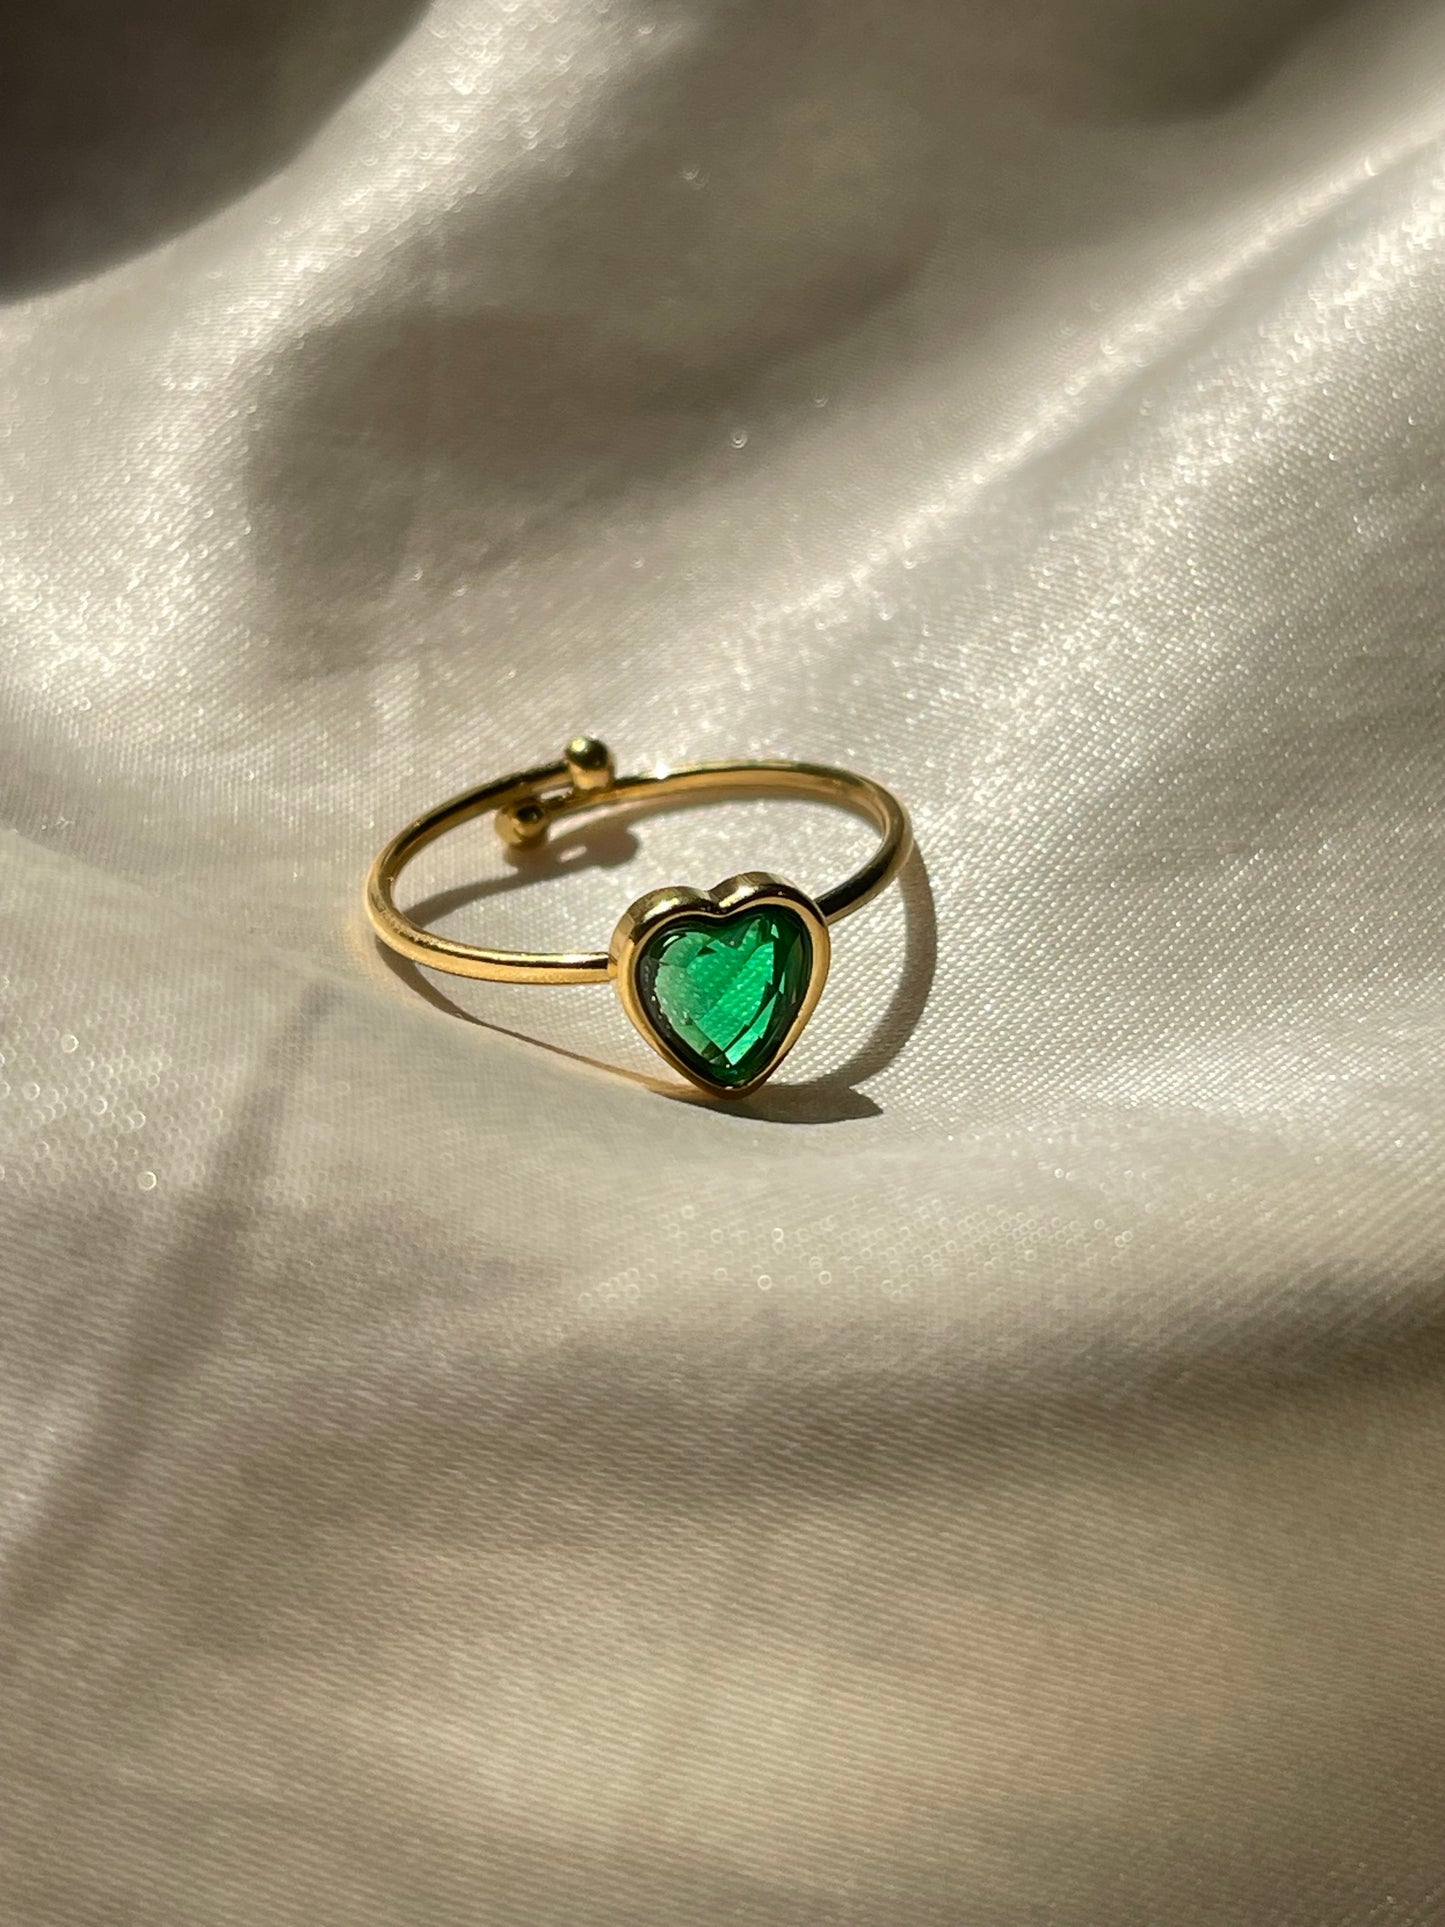 Emerald Heart Stainless Steel Ring